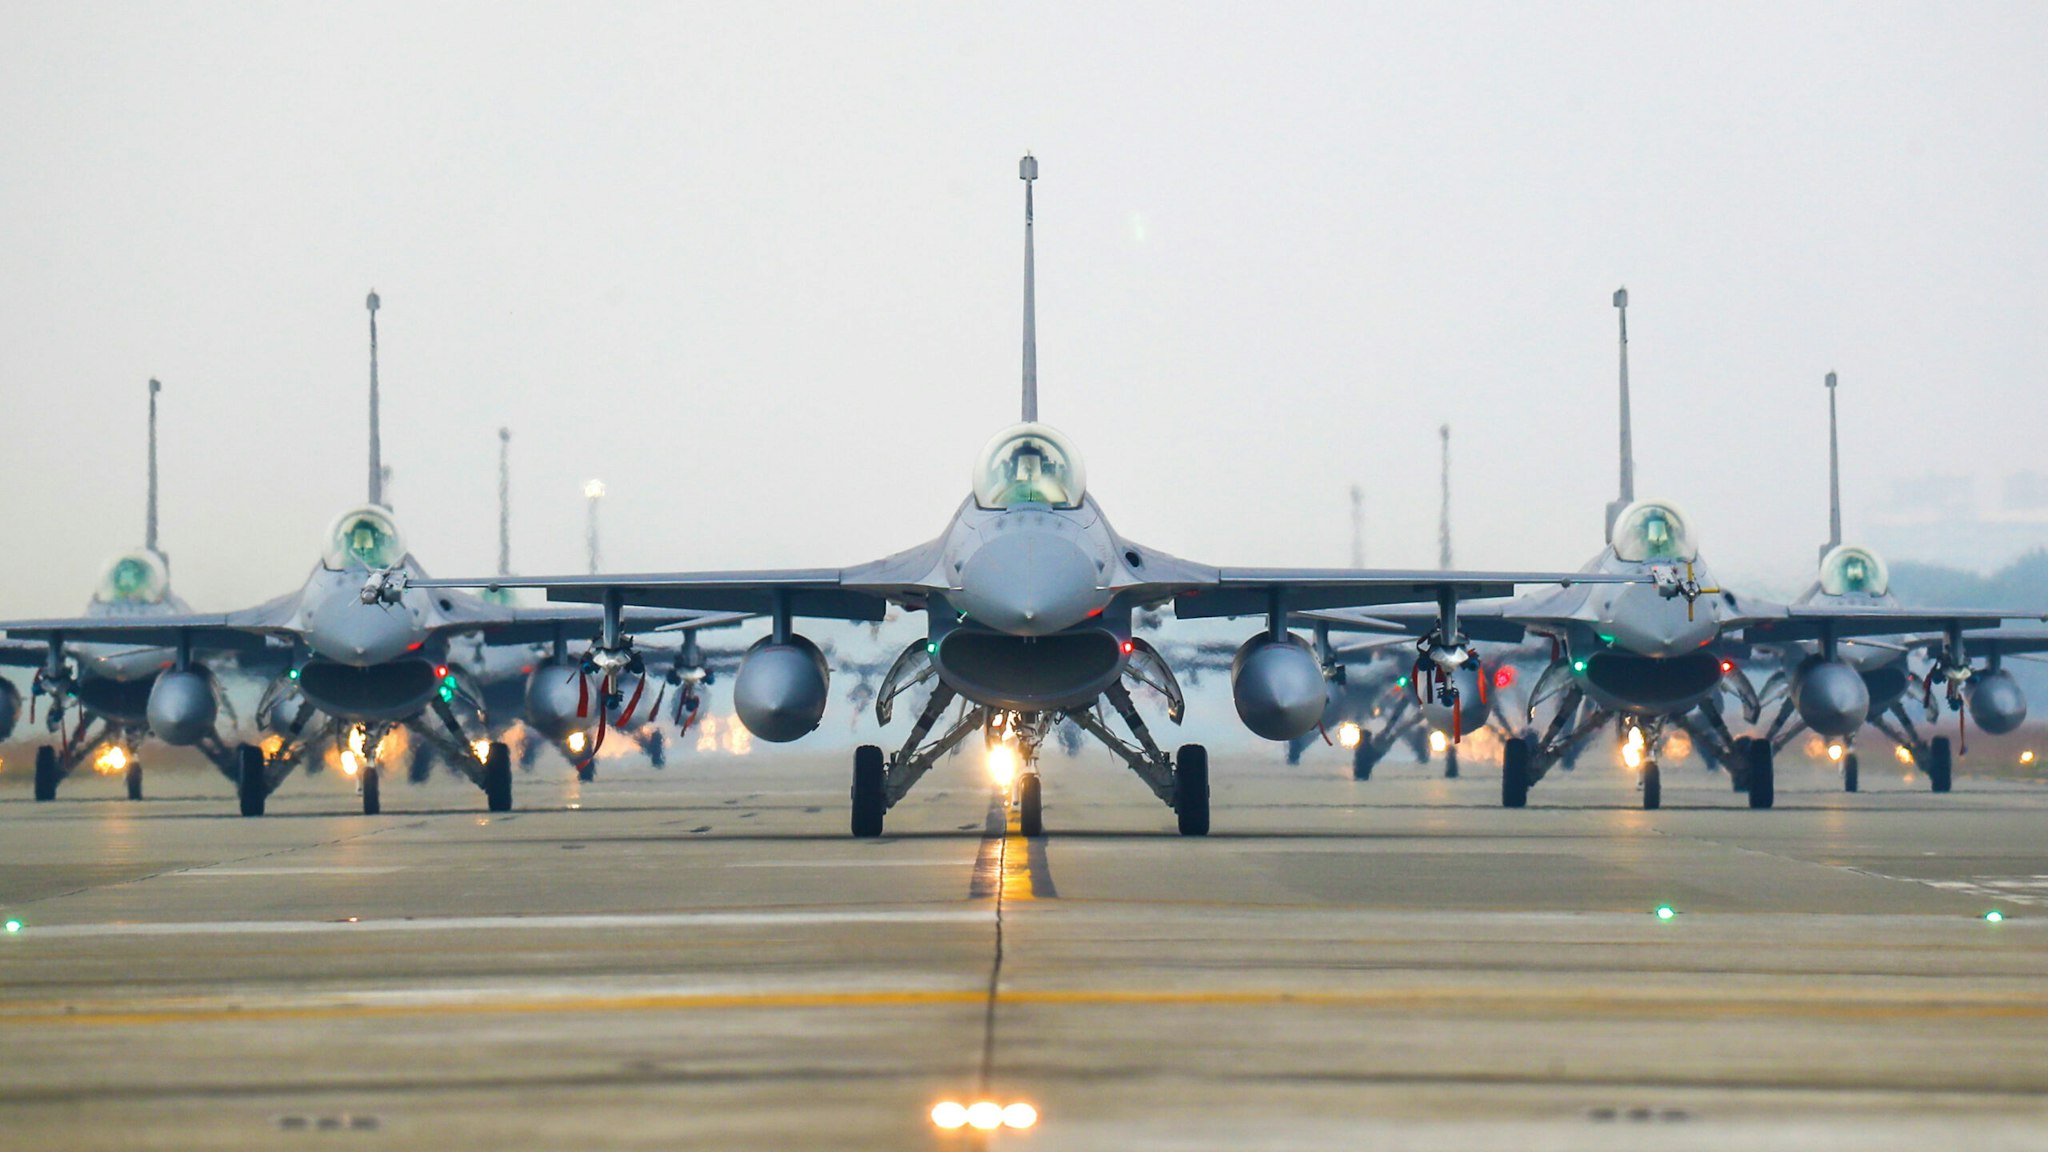 F-16V jet fighters taxi on the runway at the Air Force base, as the Taiwanese military holds a drill for preparedness enhancement ahead of the Chinese New Year, amid rising threats from China, in Chiayi, Taiwan, on Jan 5, 2022. Taiwan has been facing intensifying threats from Beijing including a record breaking number of PLA warplanes flying into its ADIZ, while the US has been approving more arms sales to Taipei.